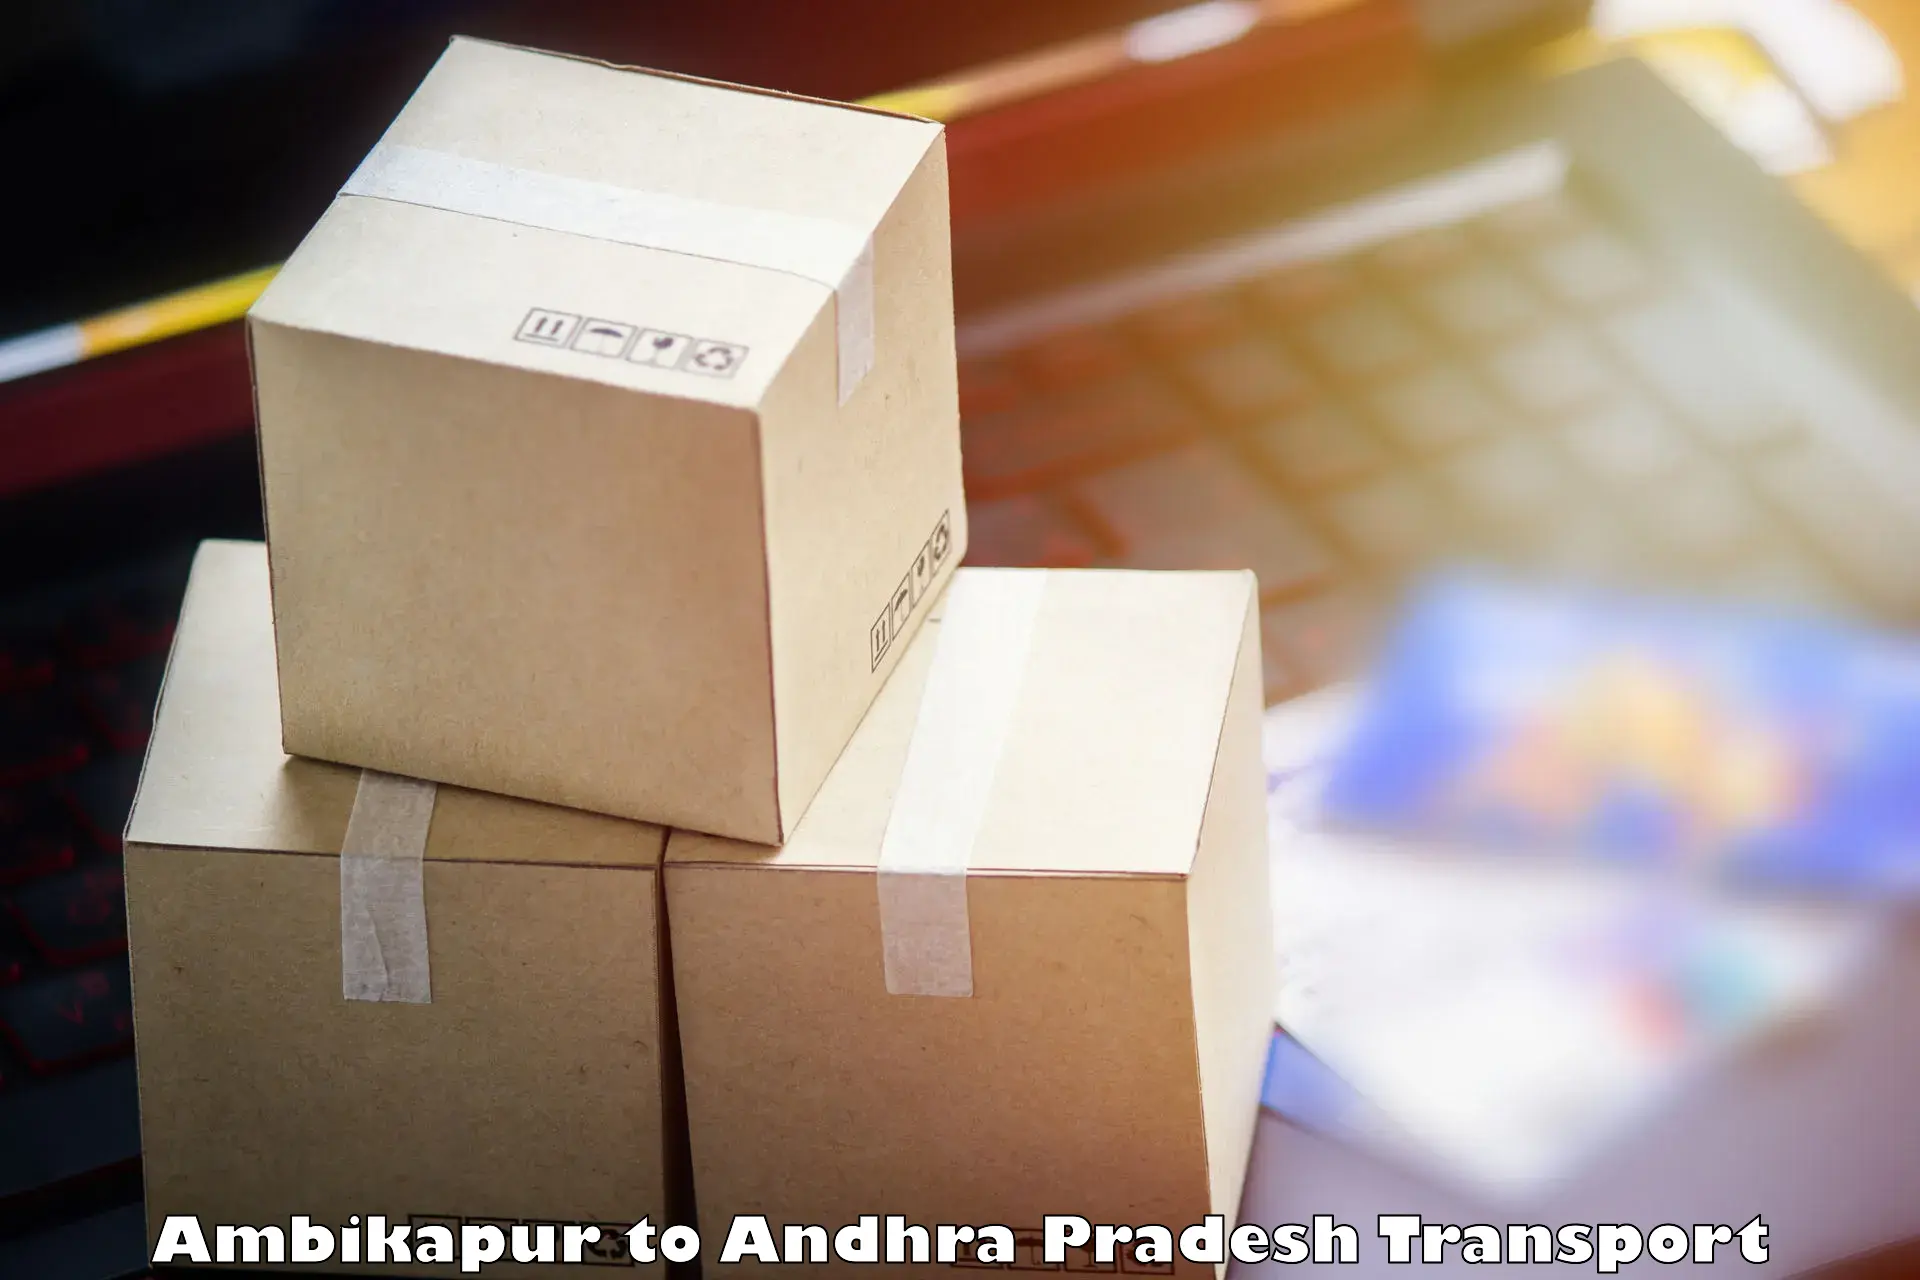 Container transport service Ambikapur to Andhra Pradesh